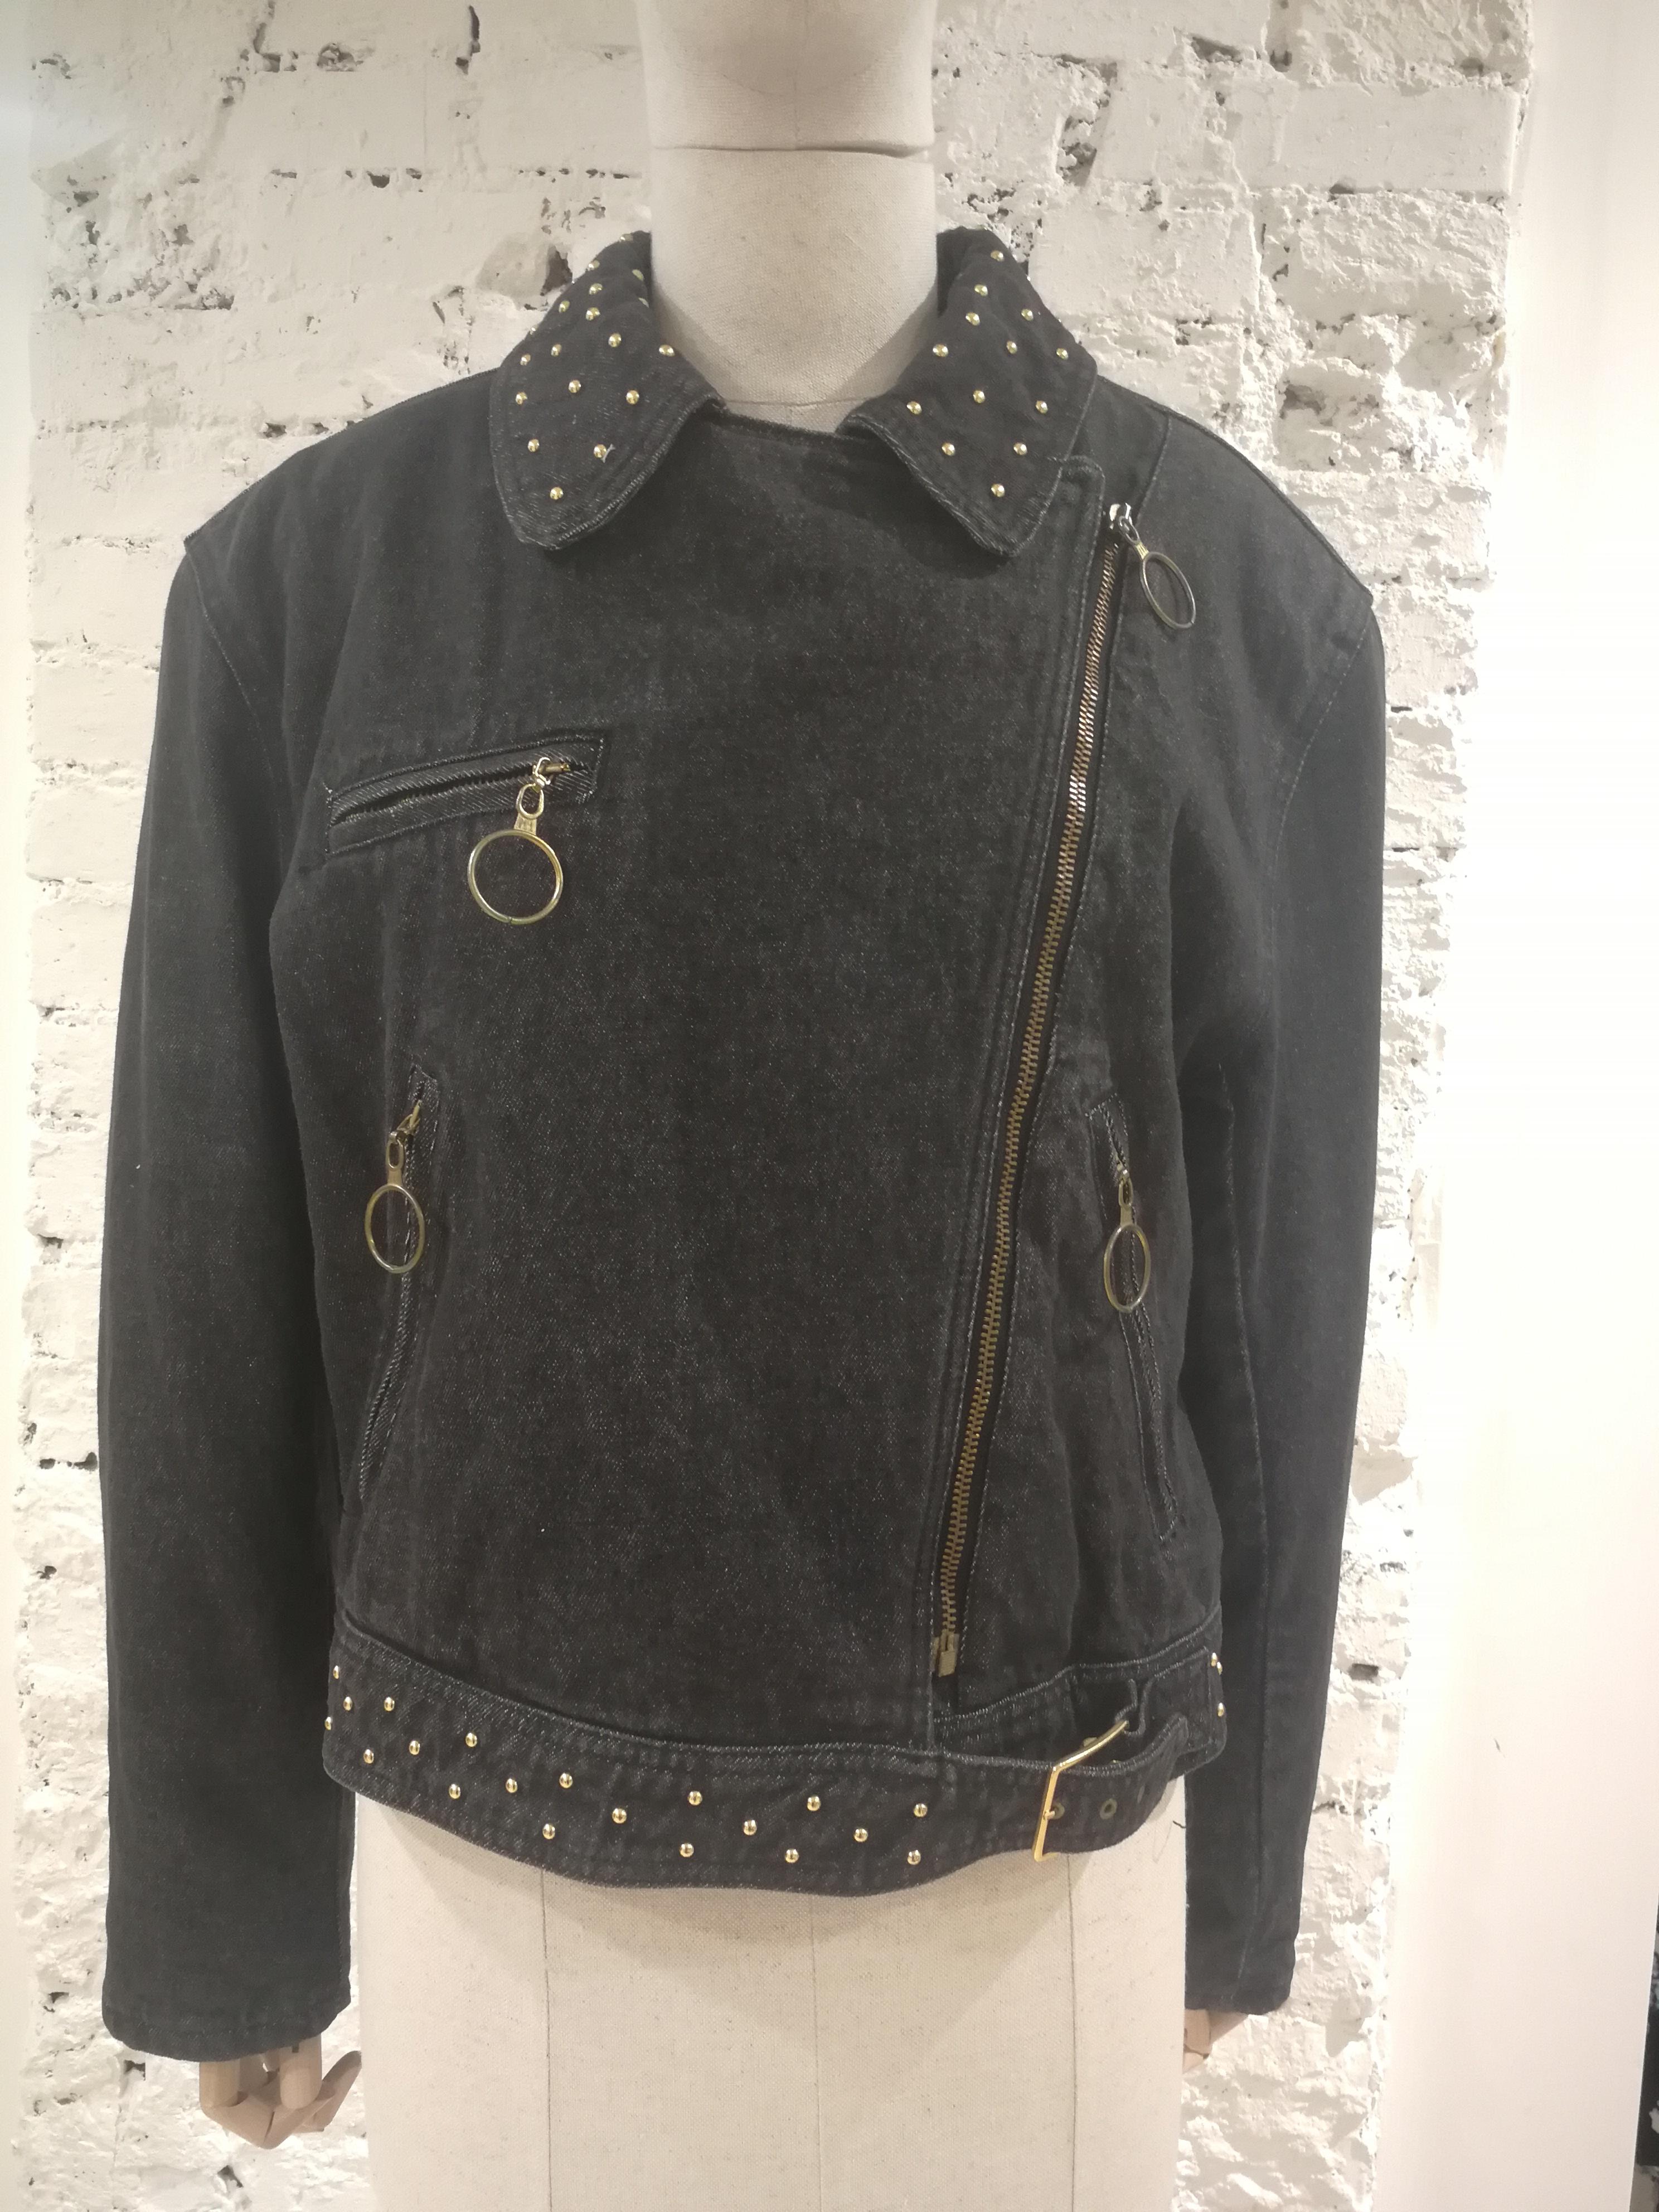 Moschino denim Cotton Jacket 
embellished with gold tone studs

Totally made in italy in size 46